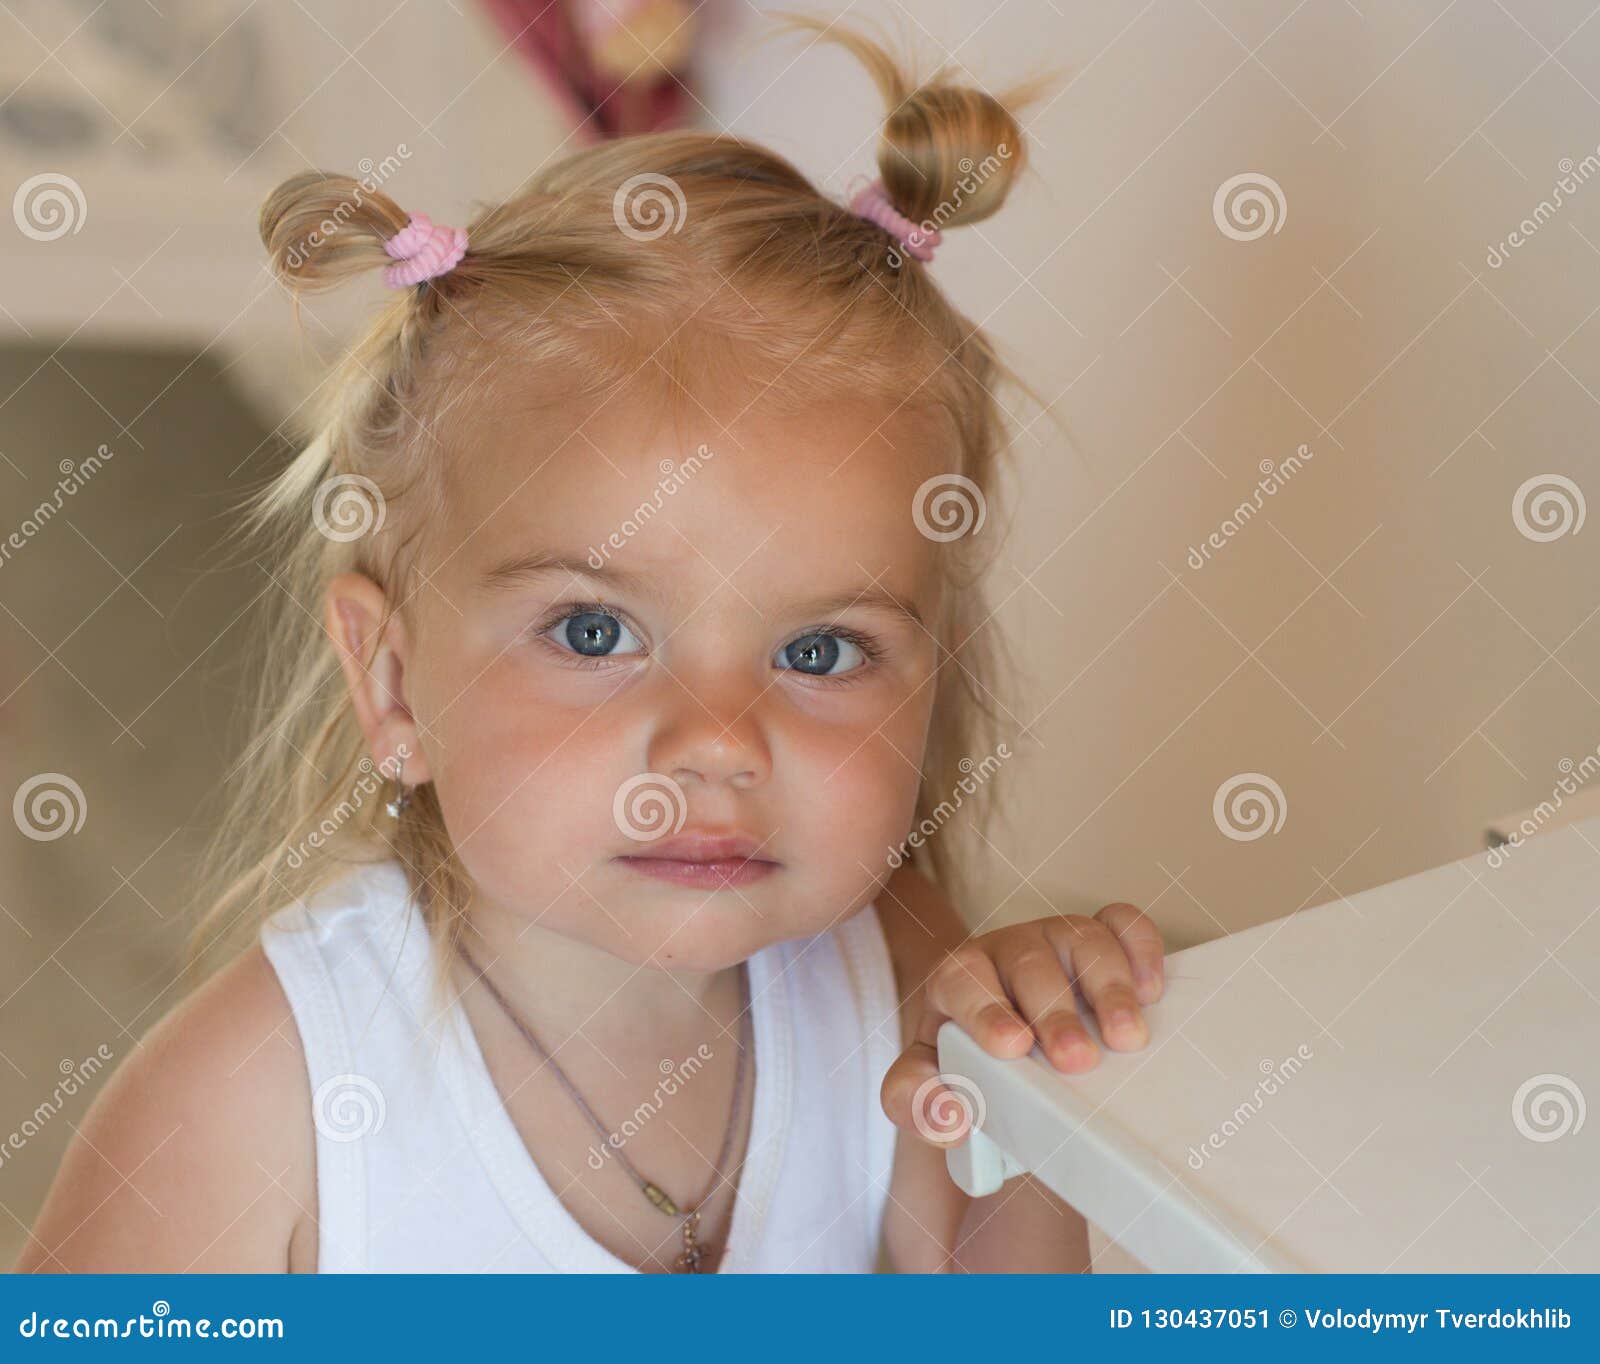 Being a Real Cutie. Small Girl with Bun Ponytails. Small Child Wear Funny  Hairstyle Stock Image - Image of offspring, little: 130437051